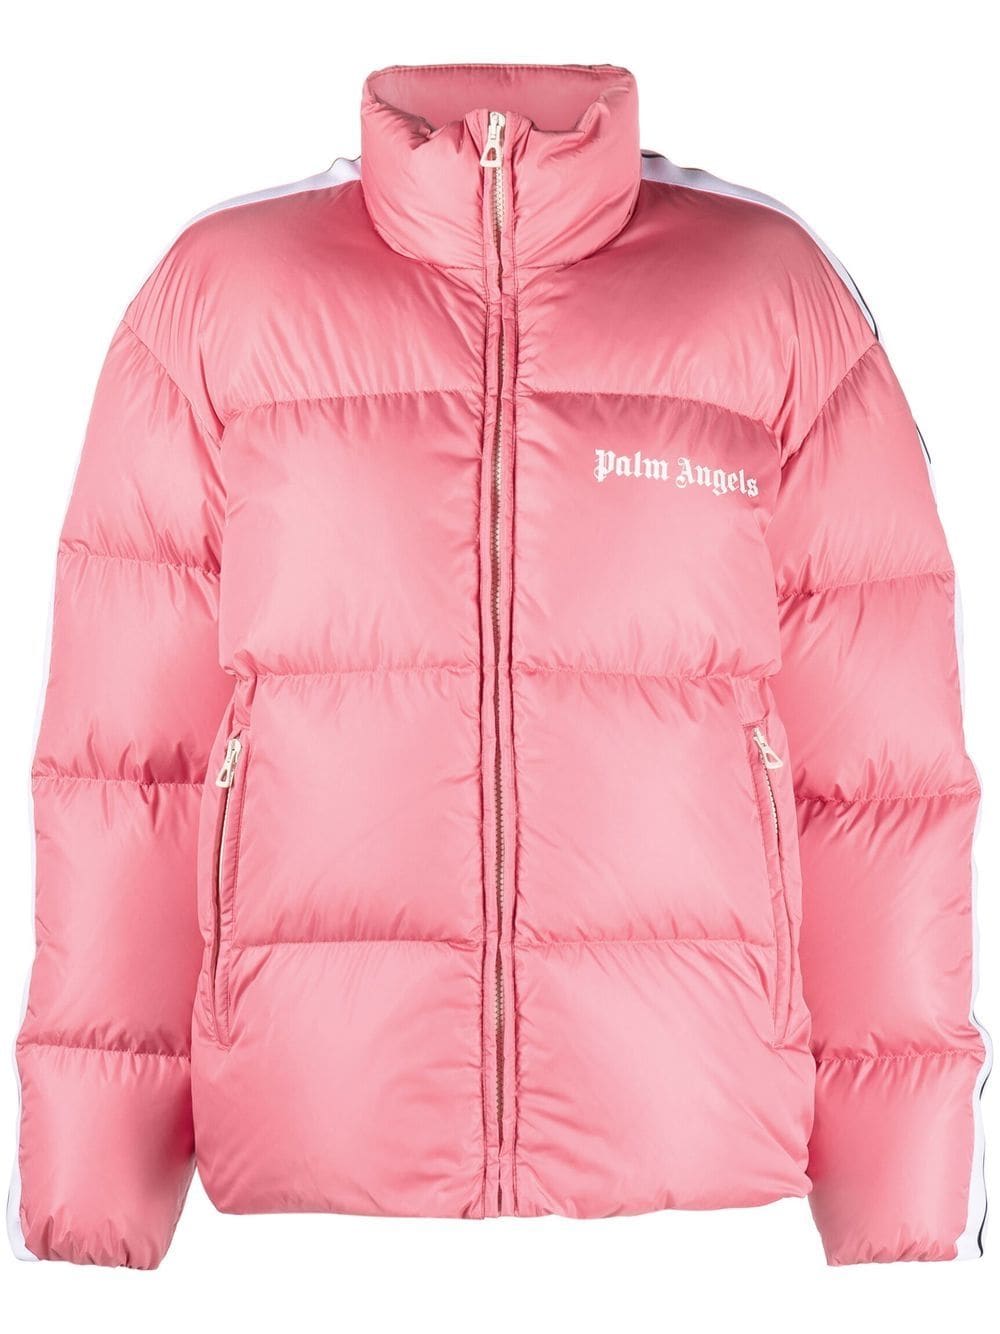 Palm Angels puffer down jacket - Pink